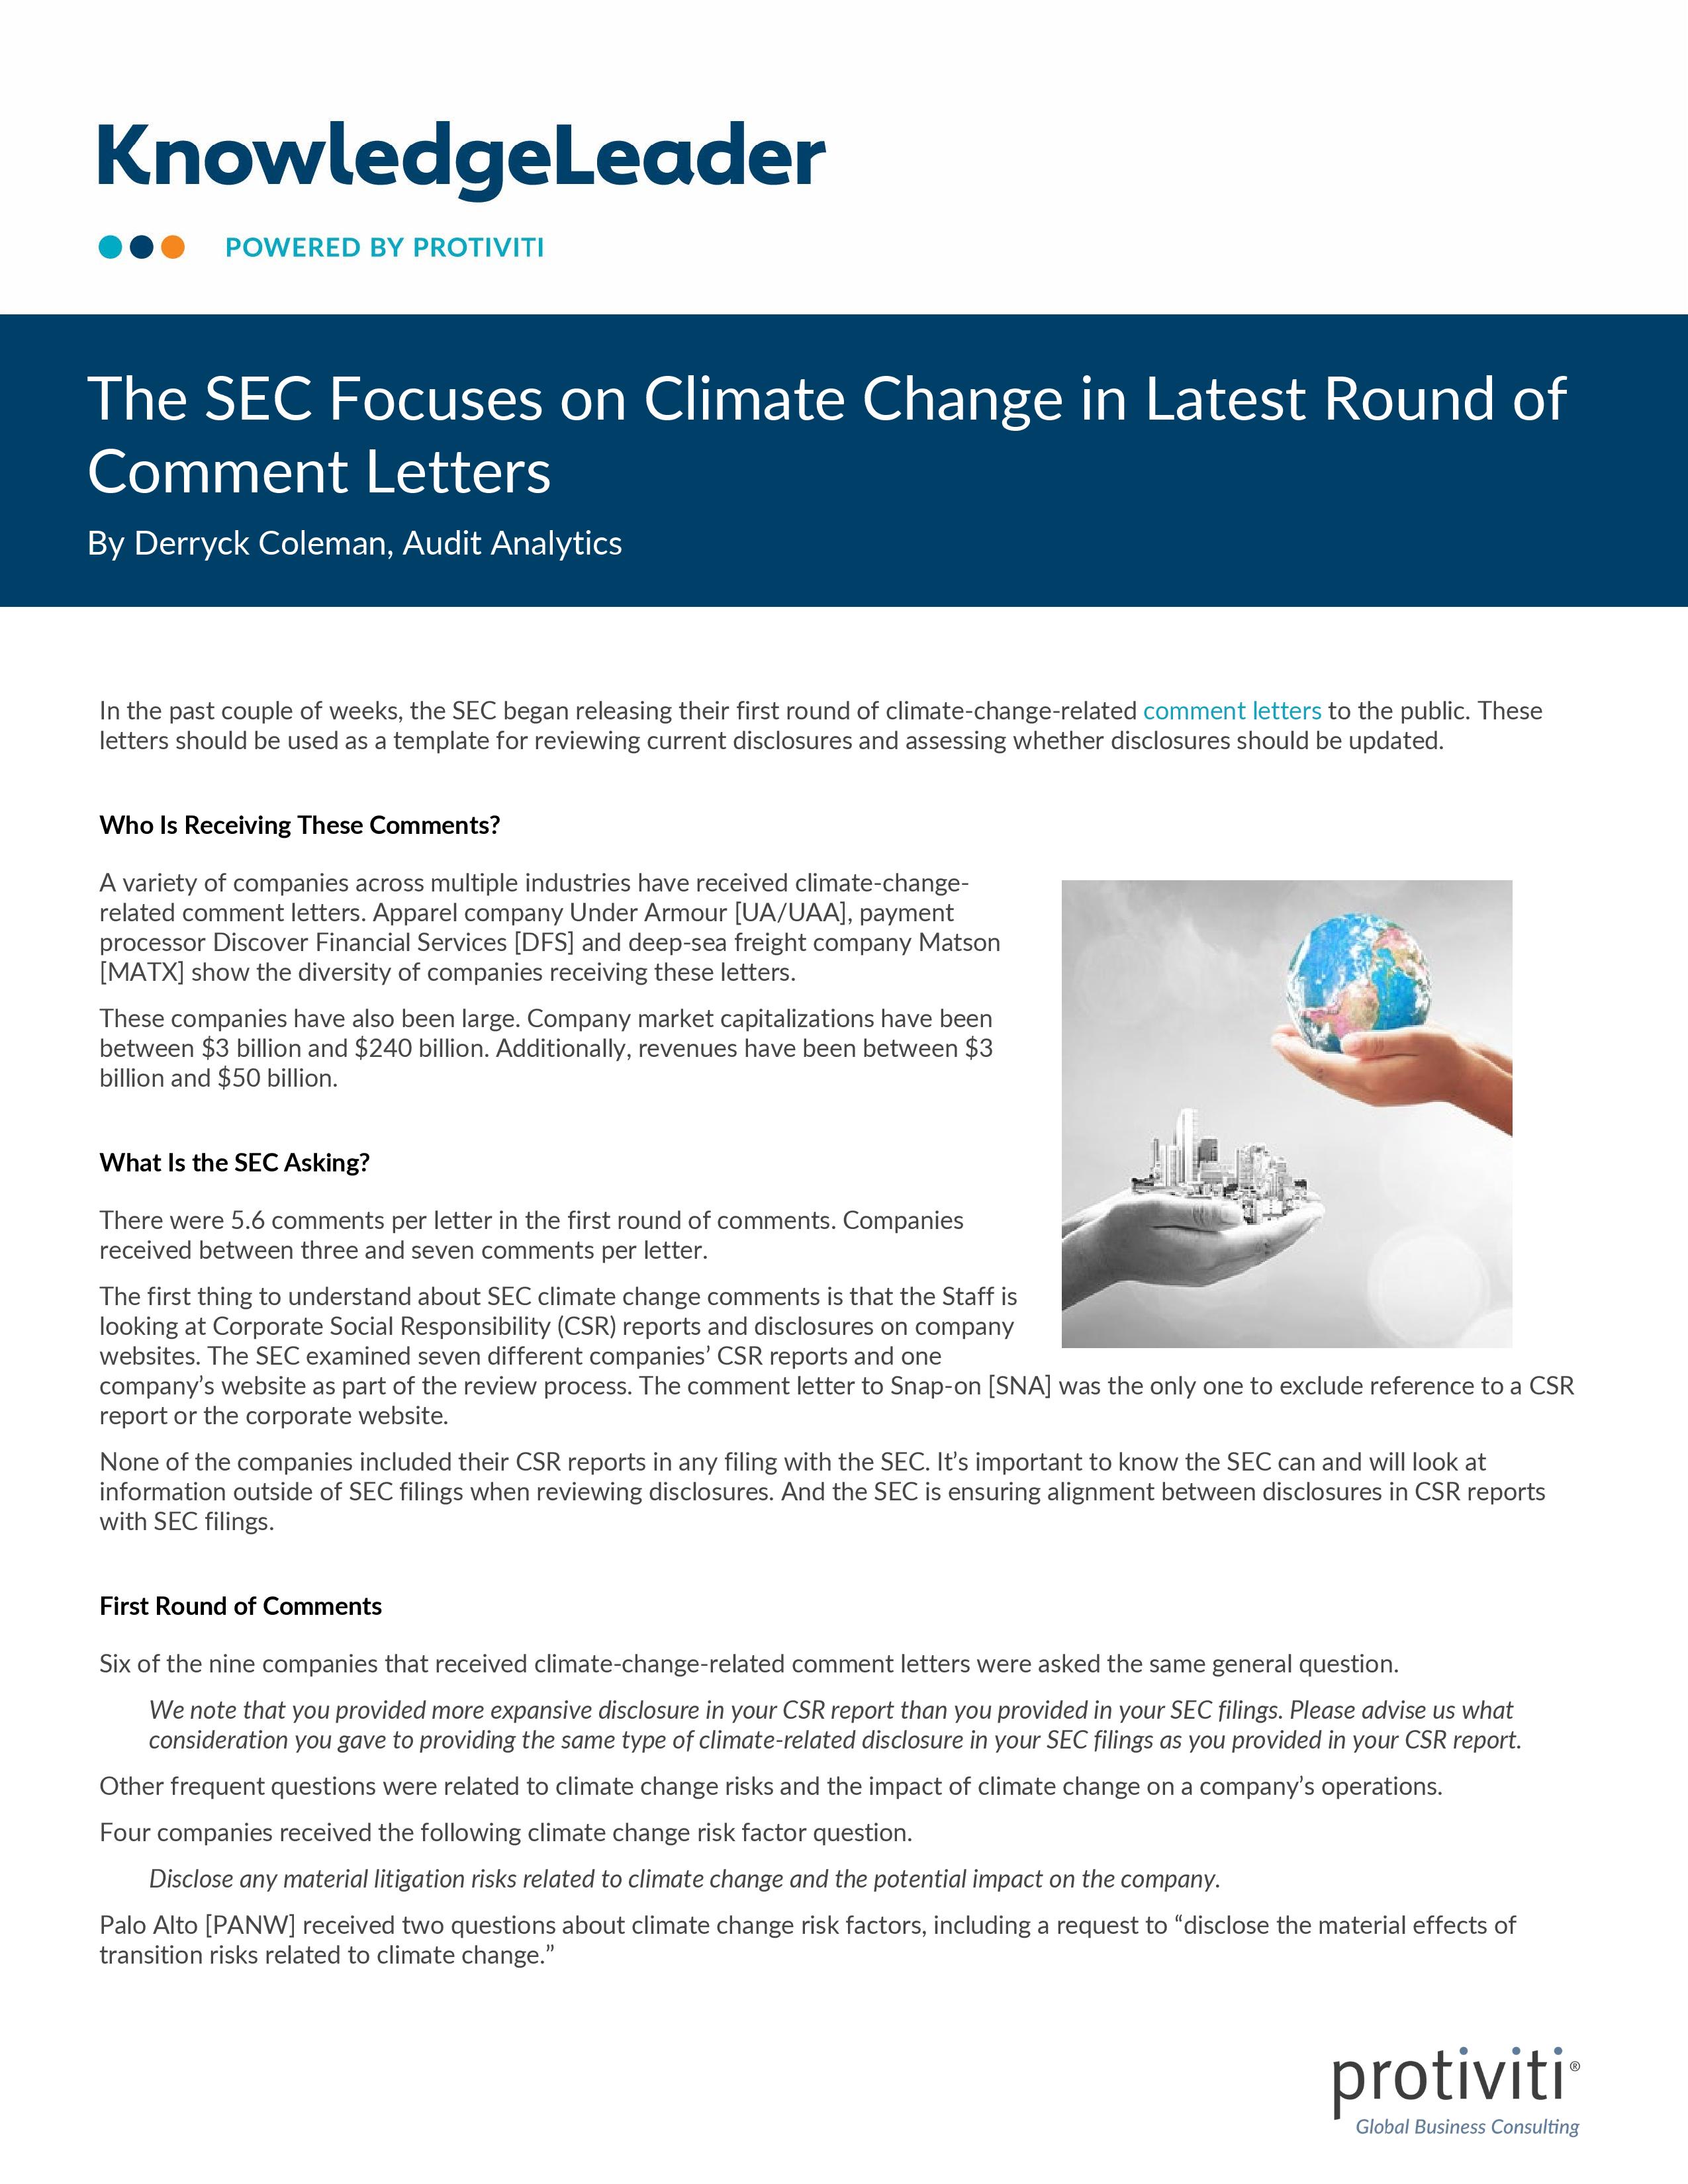 screenshot of the first page of The SEC Focuses on Climate Change in Latest Round of Comment Letters